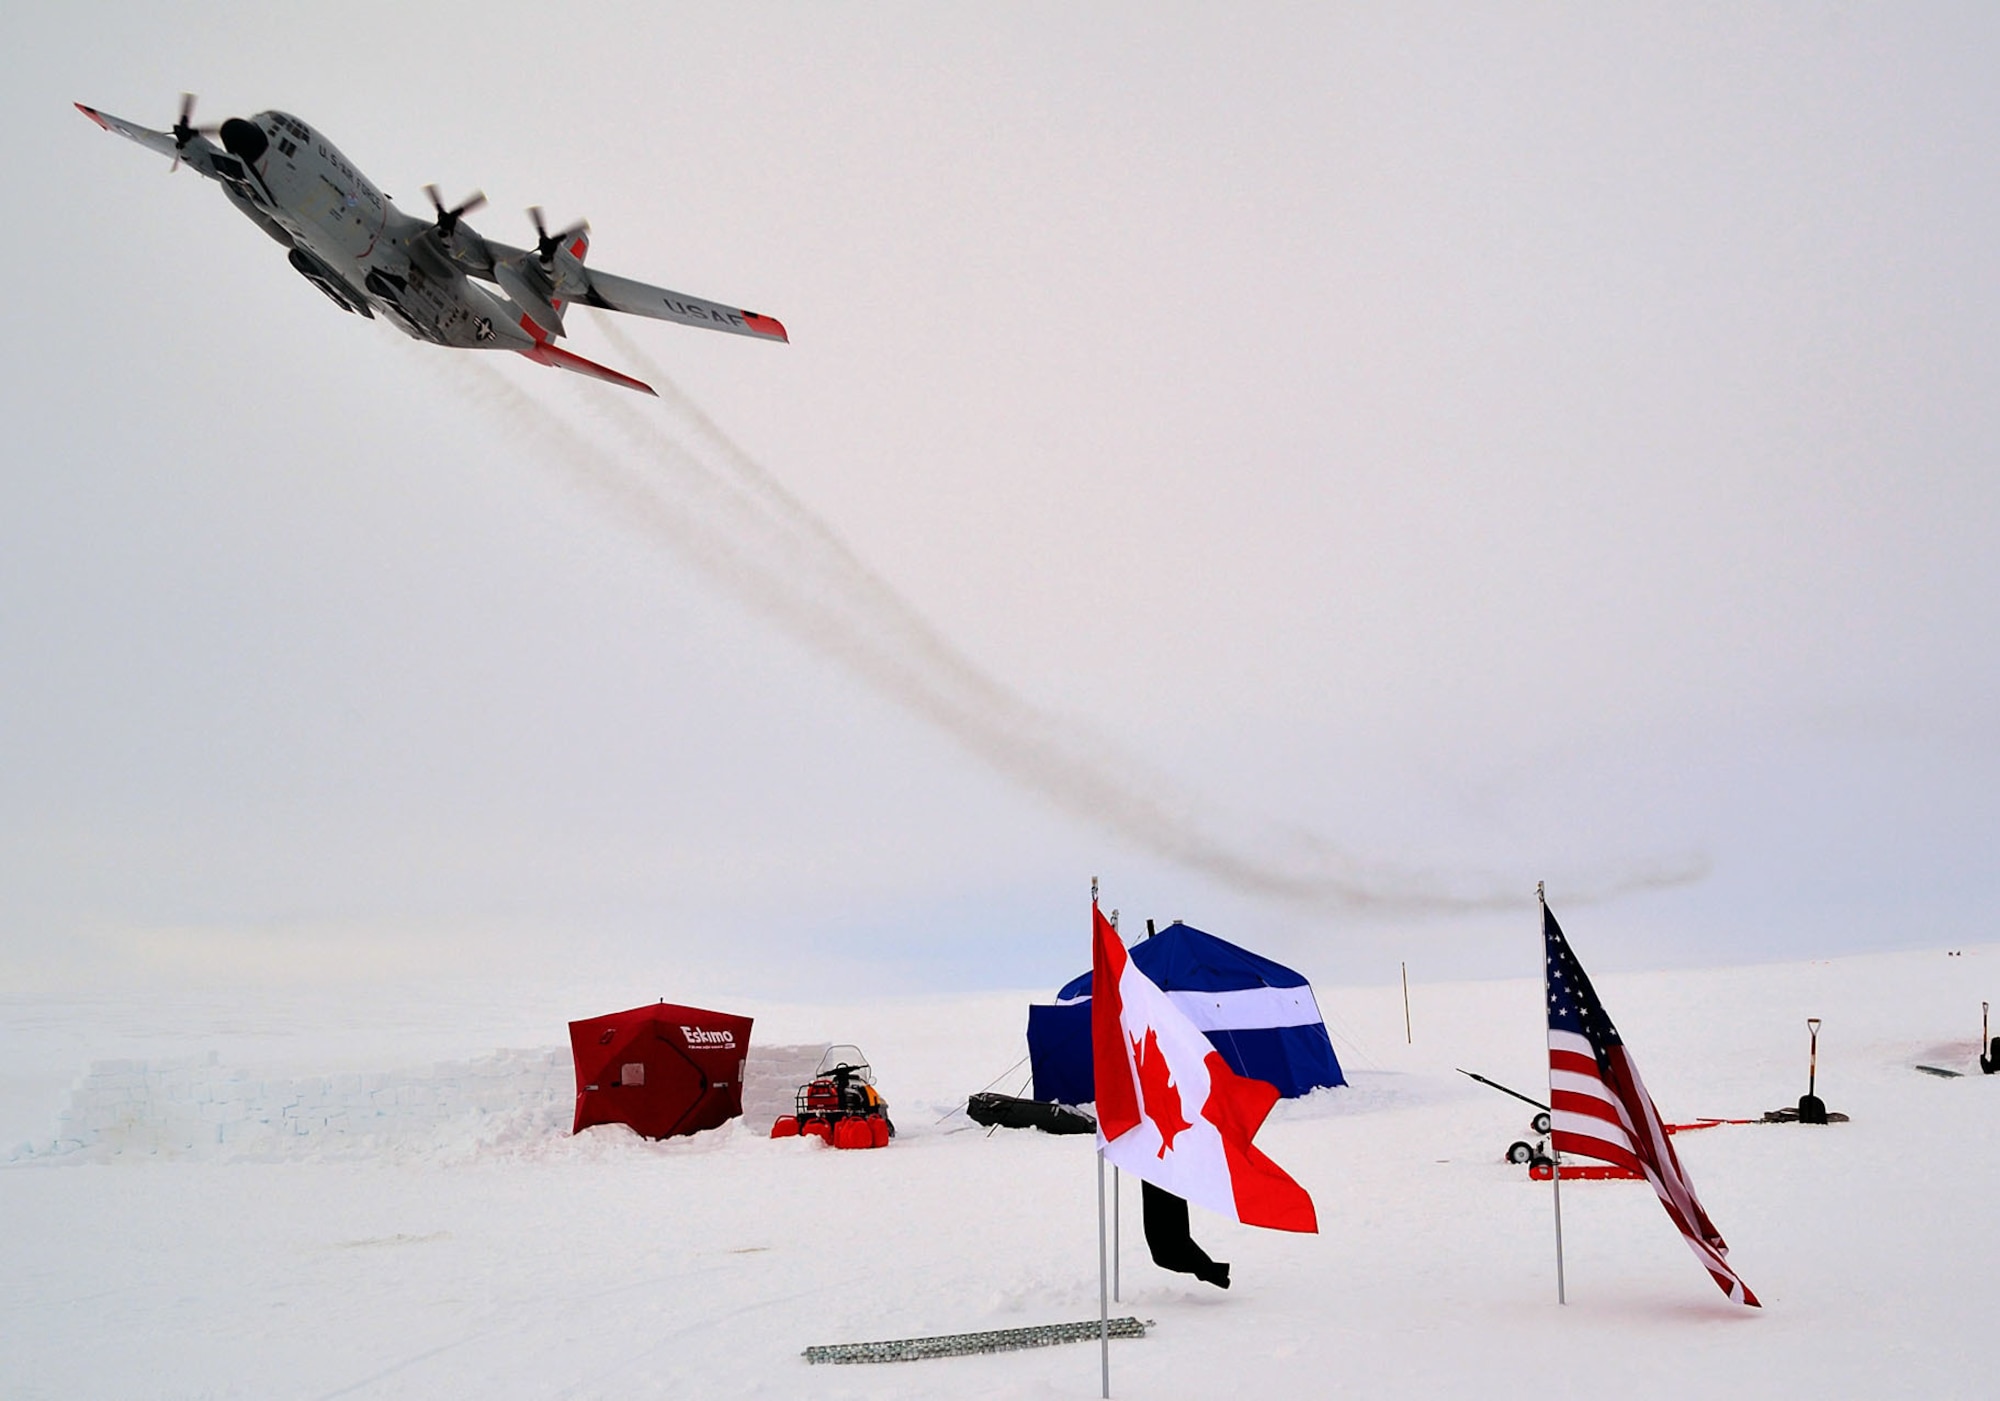 An LC-130 Hercules, assigned to the New York Air National Guard's 109th Airlift Wing, flies over an ice camp on Sherard Osborne Island, Nunavut, during Operation Nunalivut in 2014. The New York ANG flies the only ski-equipped C-130 aircraft in the world and is supporting this year’s exercise. (Courtesy photo/Canadian Armed Forces)